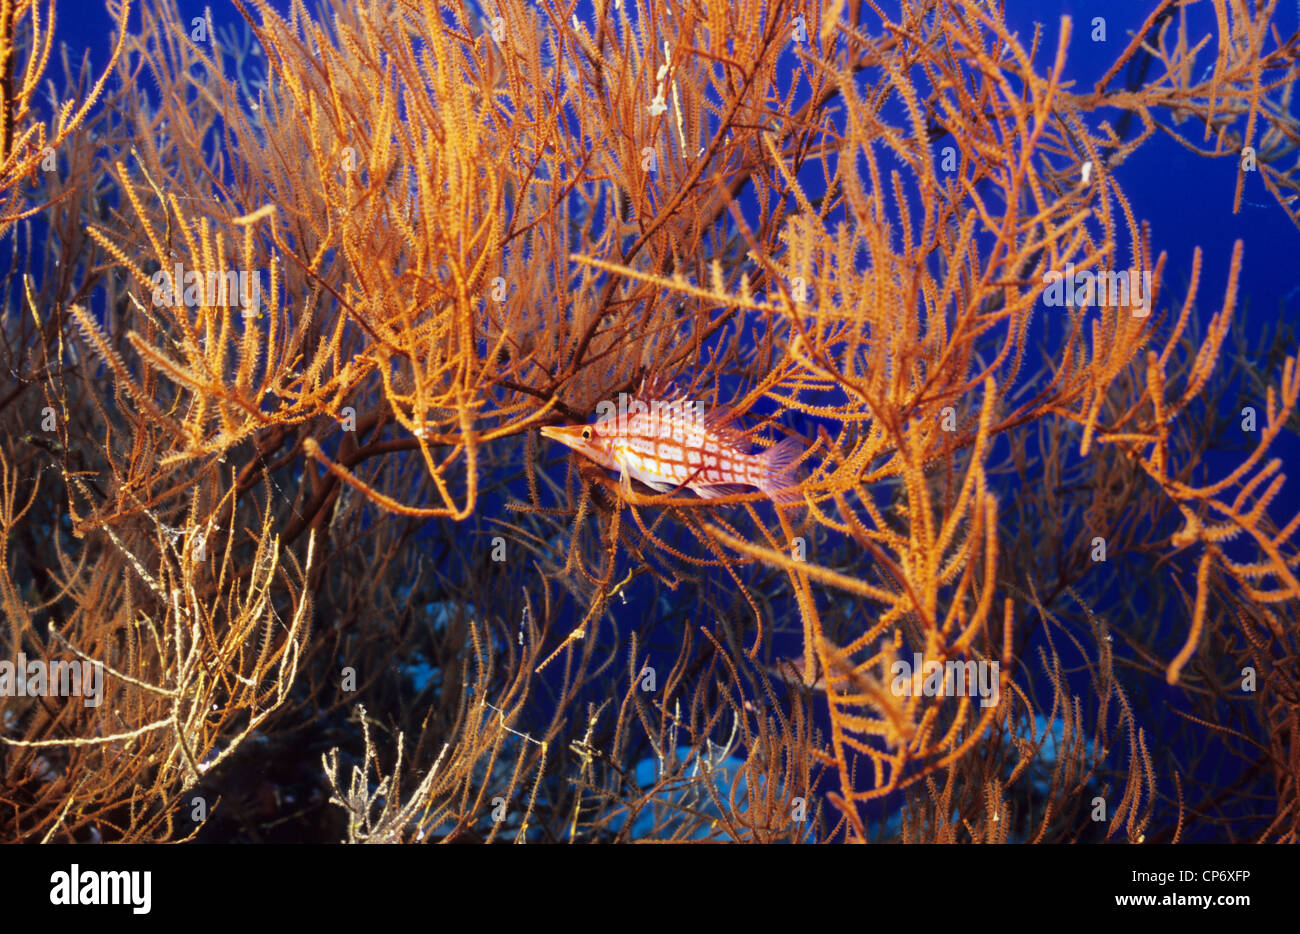 Long Nosed Hawkfish, underwater in coral bush. Found only in large gorgonian or black corals. Stock Photo